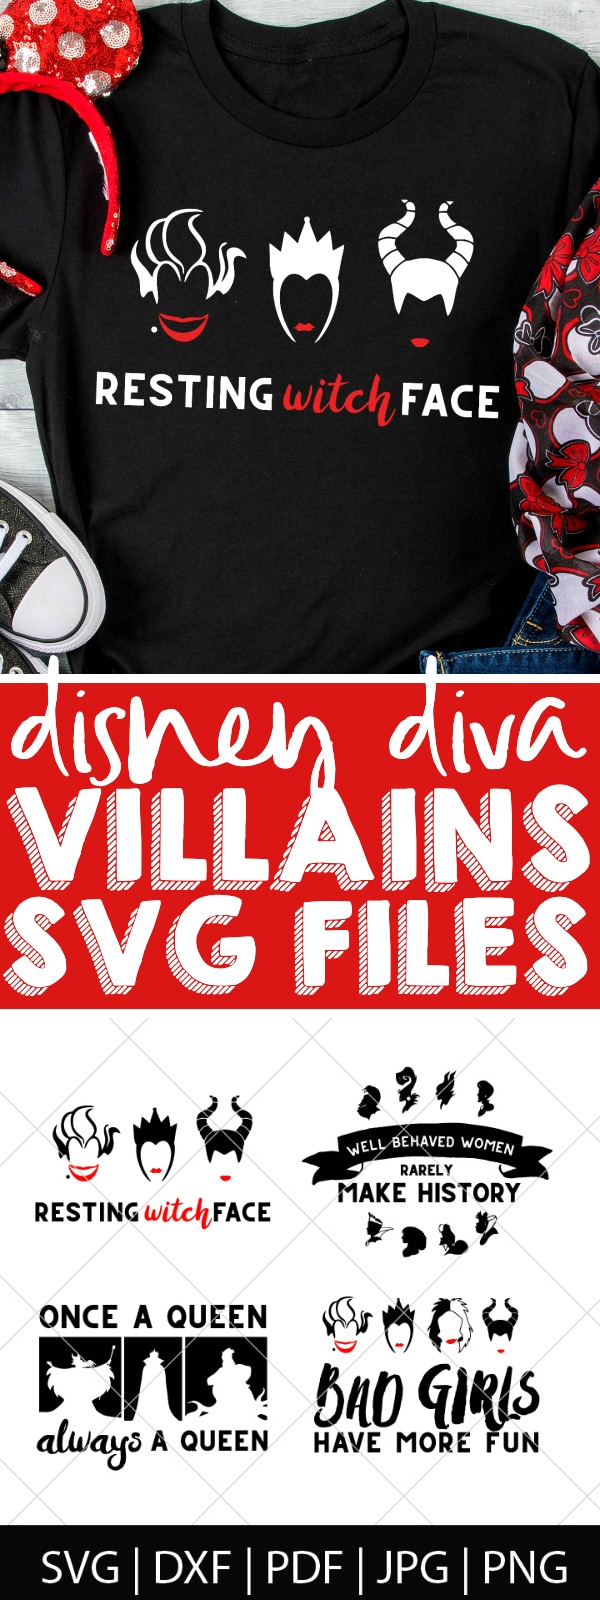 So many ways to be a Disney Villain SVG Files! Tons of new Halloween SVG files have been added to the shop celebrating our favorite bad guys, including the Evil Queen, Maleficent, Ursula, Cruella de Vil, Jafar, Captain Hook, Gaston and more! These digital files are perfect for DIY Halloween shirts, decor, party invites and more! | THE LOVE NERDS #DisneyCricut #DIYHalloween #HalloweenCricut 